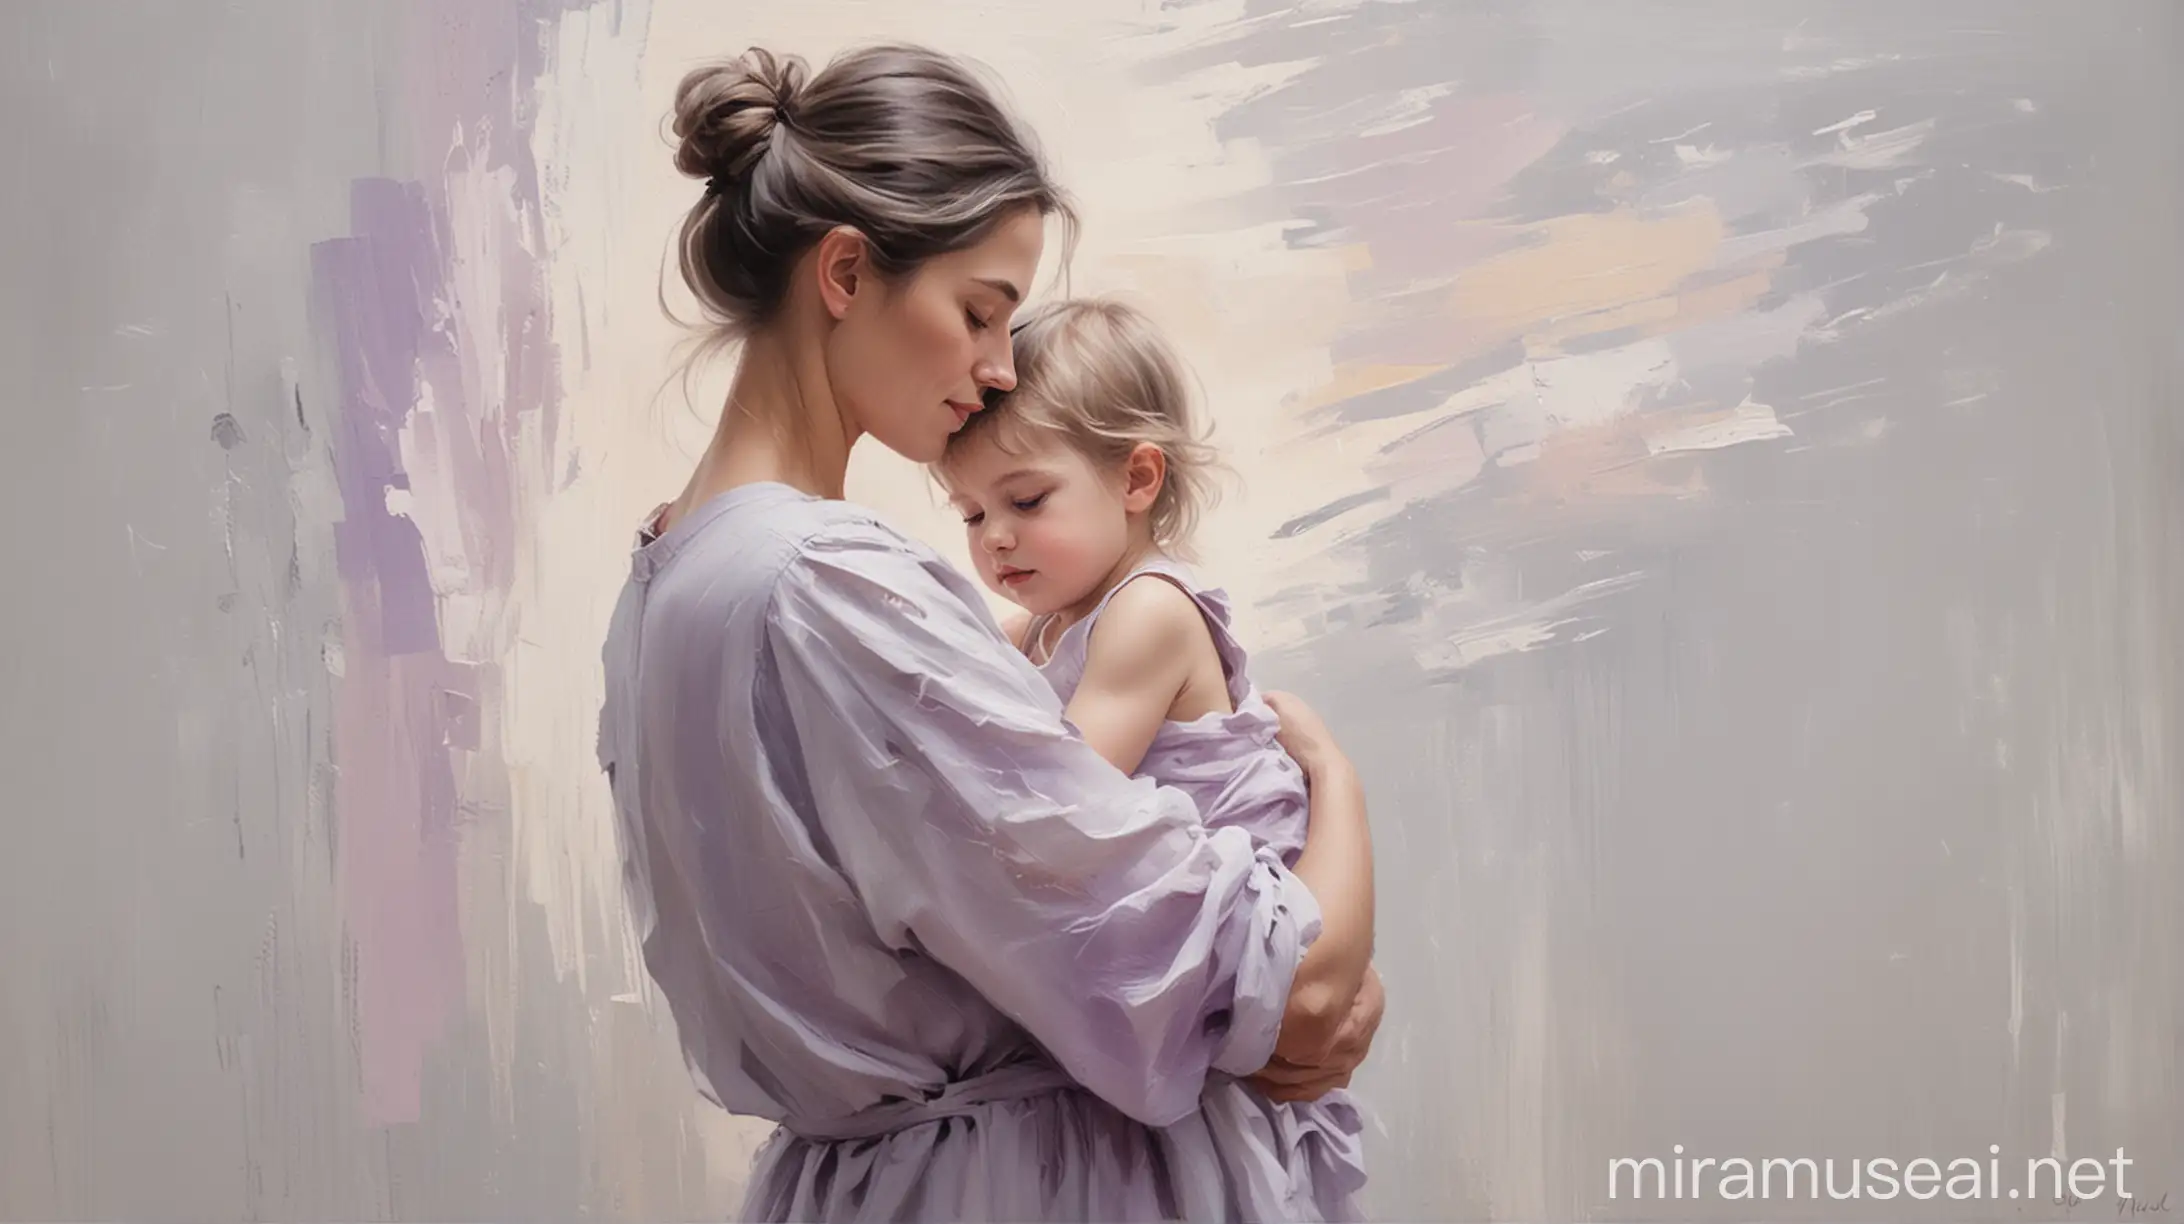 An oil painting of a mother holding her child, back,
abstract, impressionist, painted in a soft style to create an ethereal, dreamy atmosphere. The painting is in the style of an oil painting by an impressionist artist with soft tones. The background is white and light gray with a slight purple tint. The image conveys calm and serenity. This is an impressionist oil painting with clearly visible brushstrokes，Horizontal poster